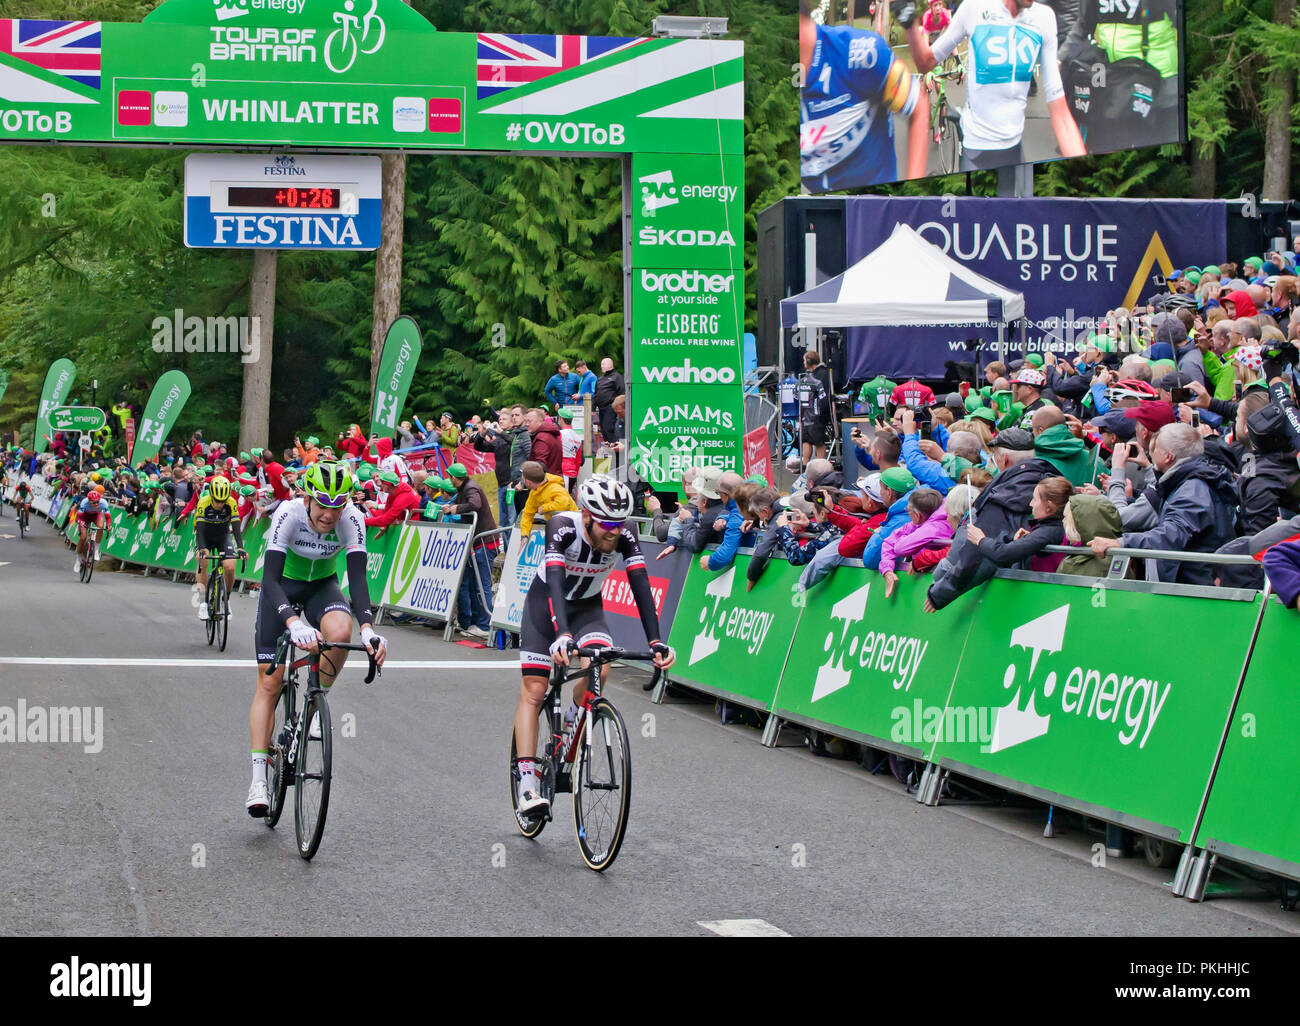 Tour of Britain 2018, Stage 6, 7 September. Tired riders cross the finish line at Whinlatter Visitor Centre in front of large enthusiastic crowds. Stock Photo